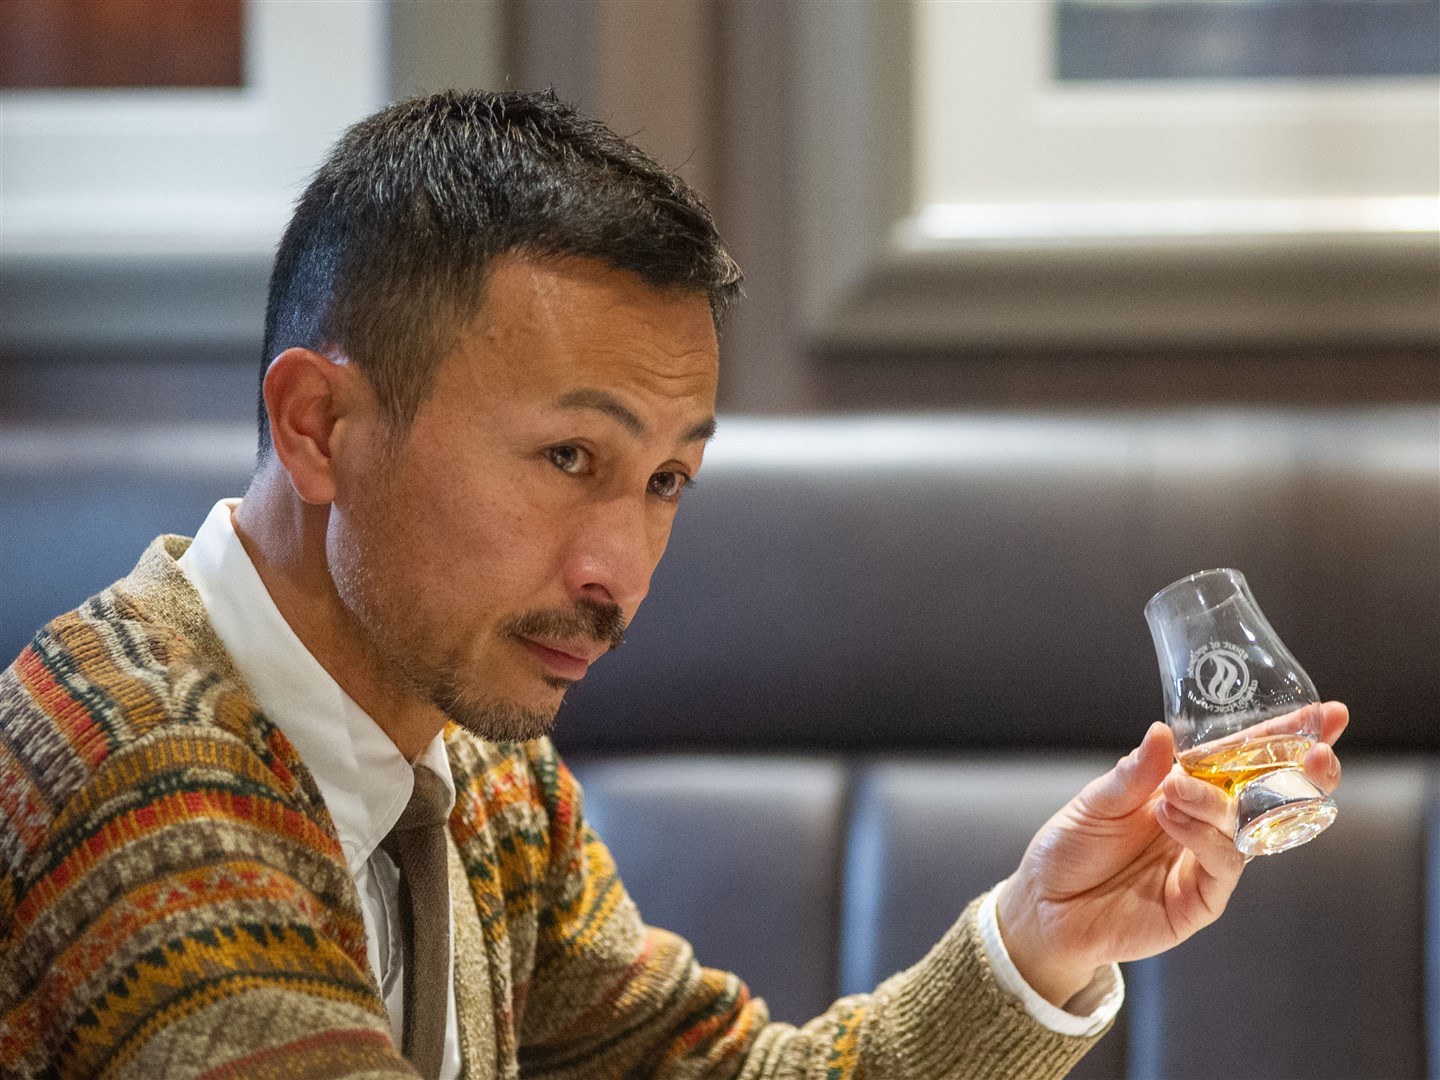 Tatsuya Minigawa, of The Highlander Inn in Craigellachie, during judging at the Station Hotel in Rothes. Picture: Daniel Forsyth.